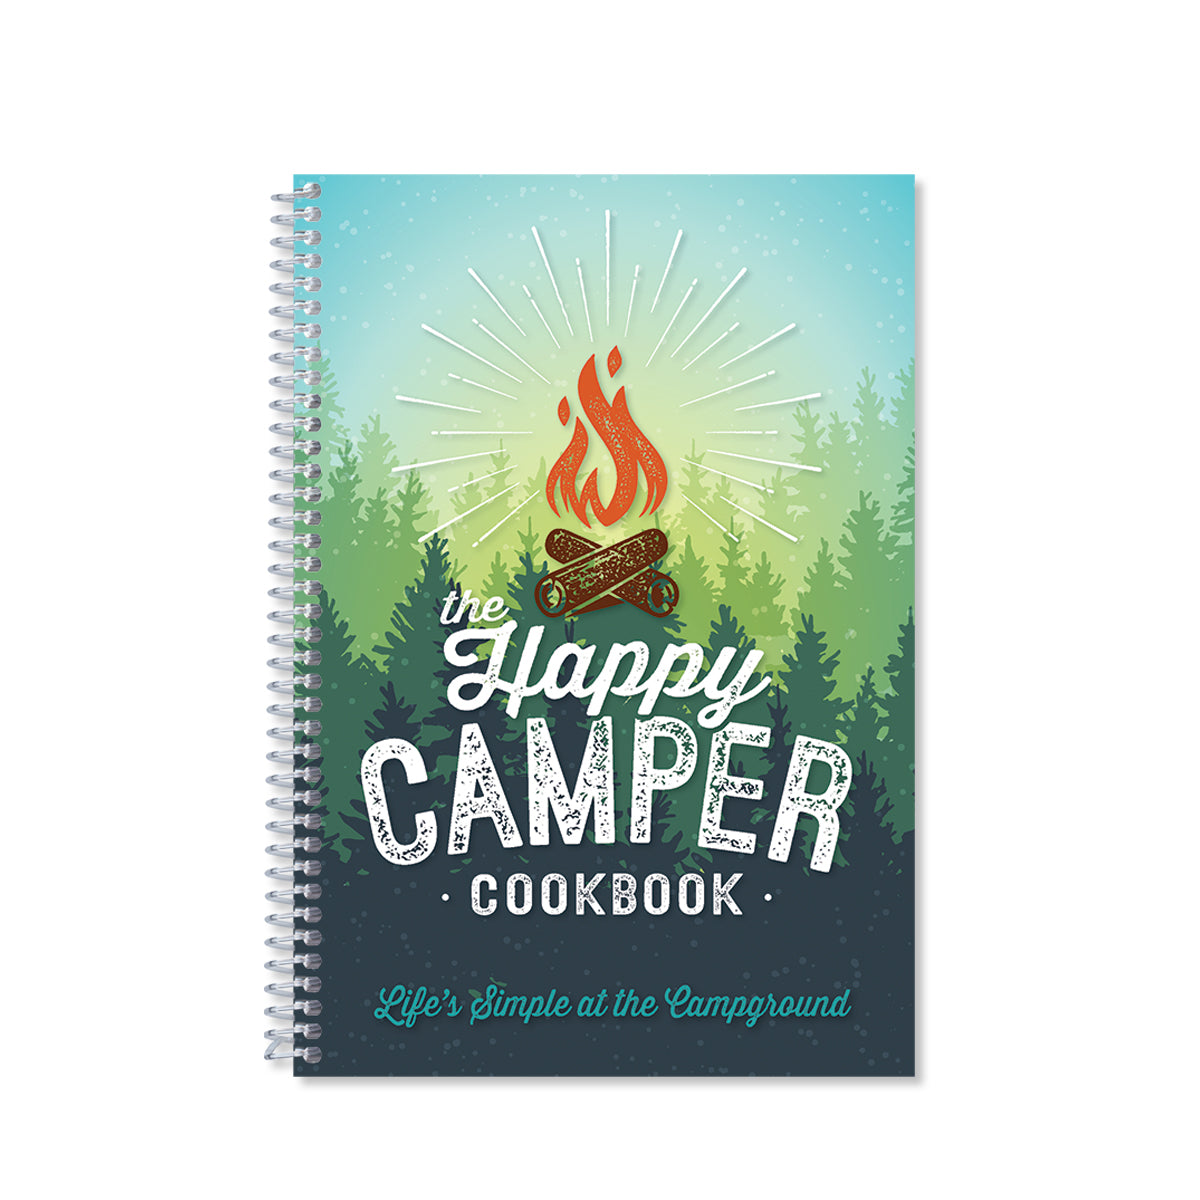 Cover of The Happy Camper Cookbook - Life's Simple at the Campground.